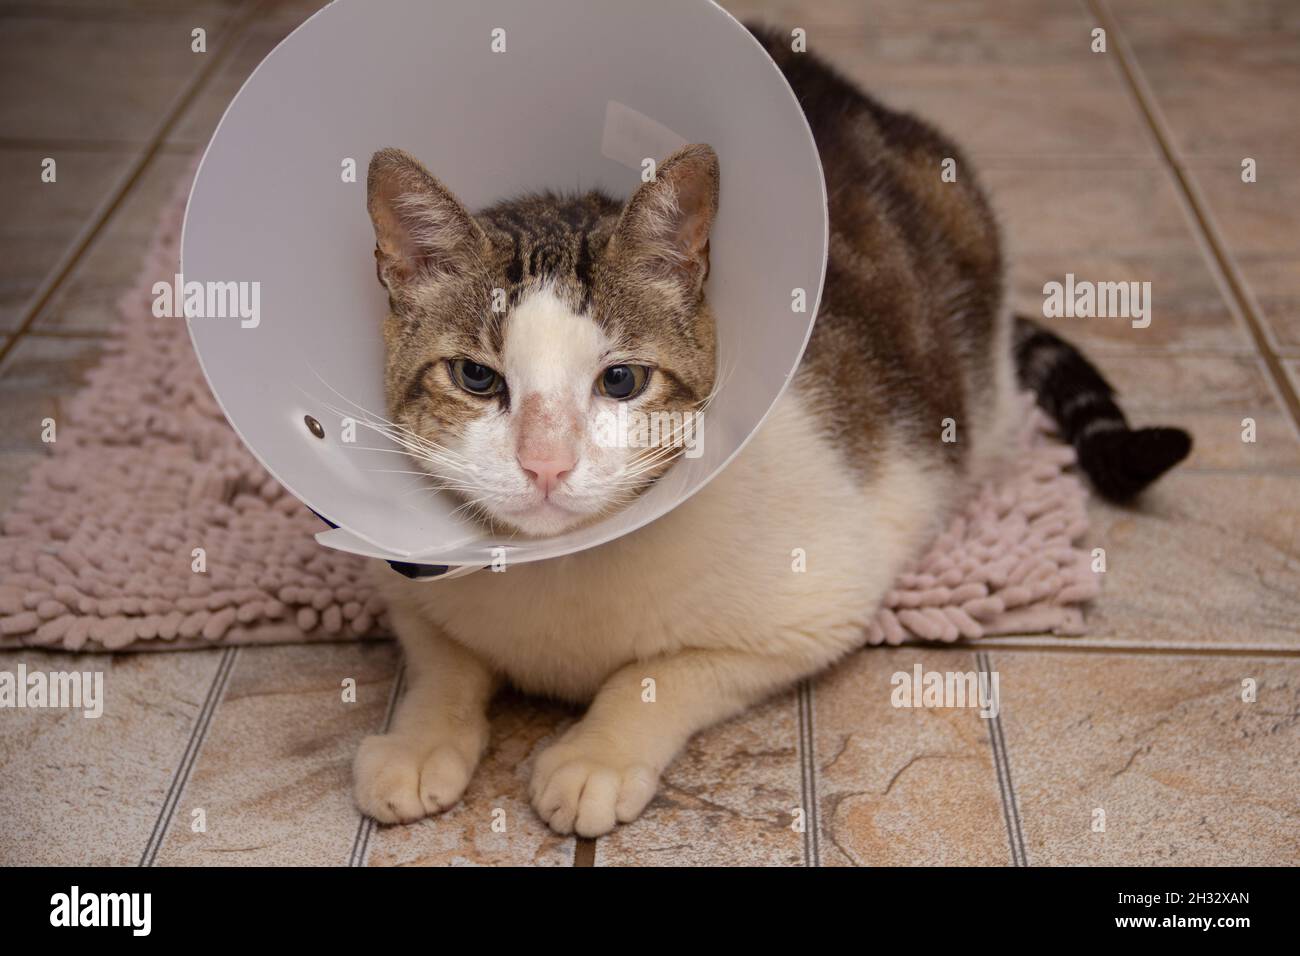 A short-haired tabby on a rug, undergoing treatment, wearing an Elizabethan collar around his neck. Stock Photo